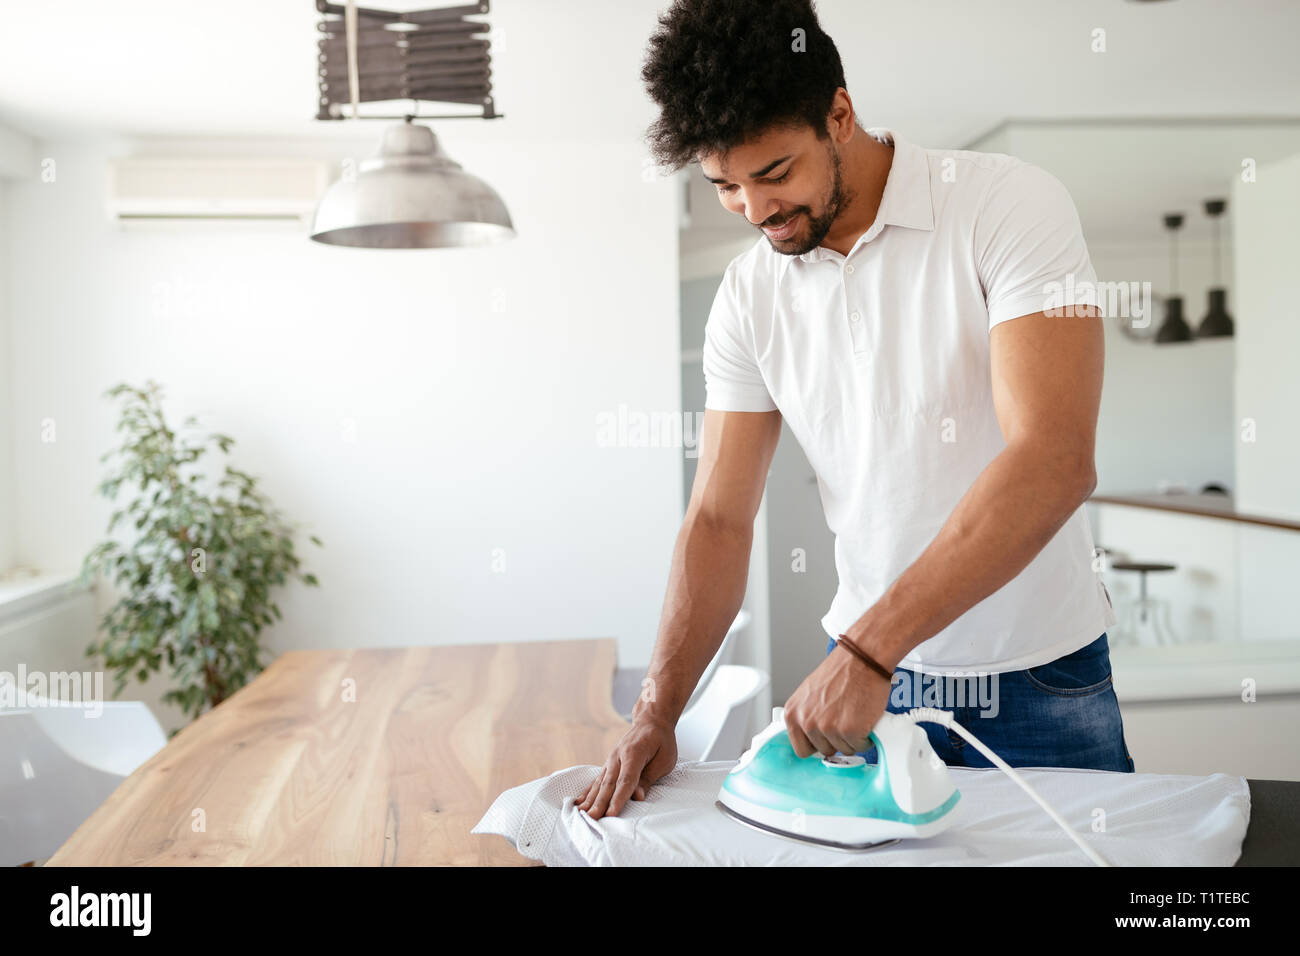 Young Happy Man Ironing Clothes Stock Photo